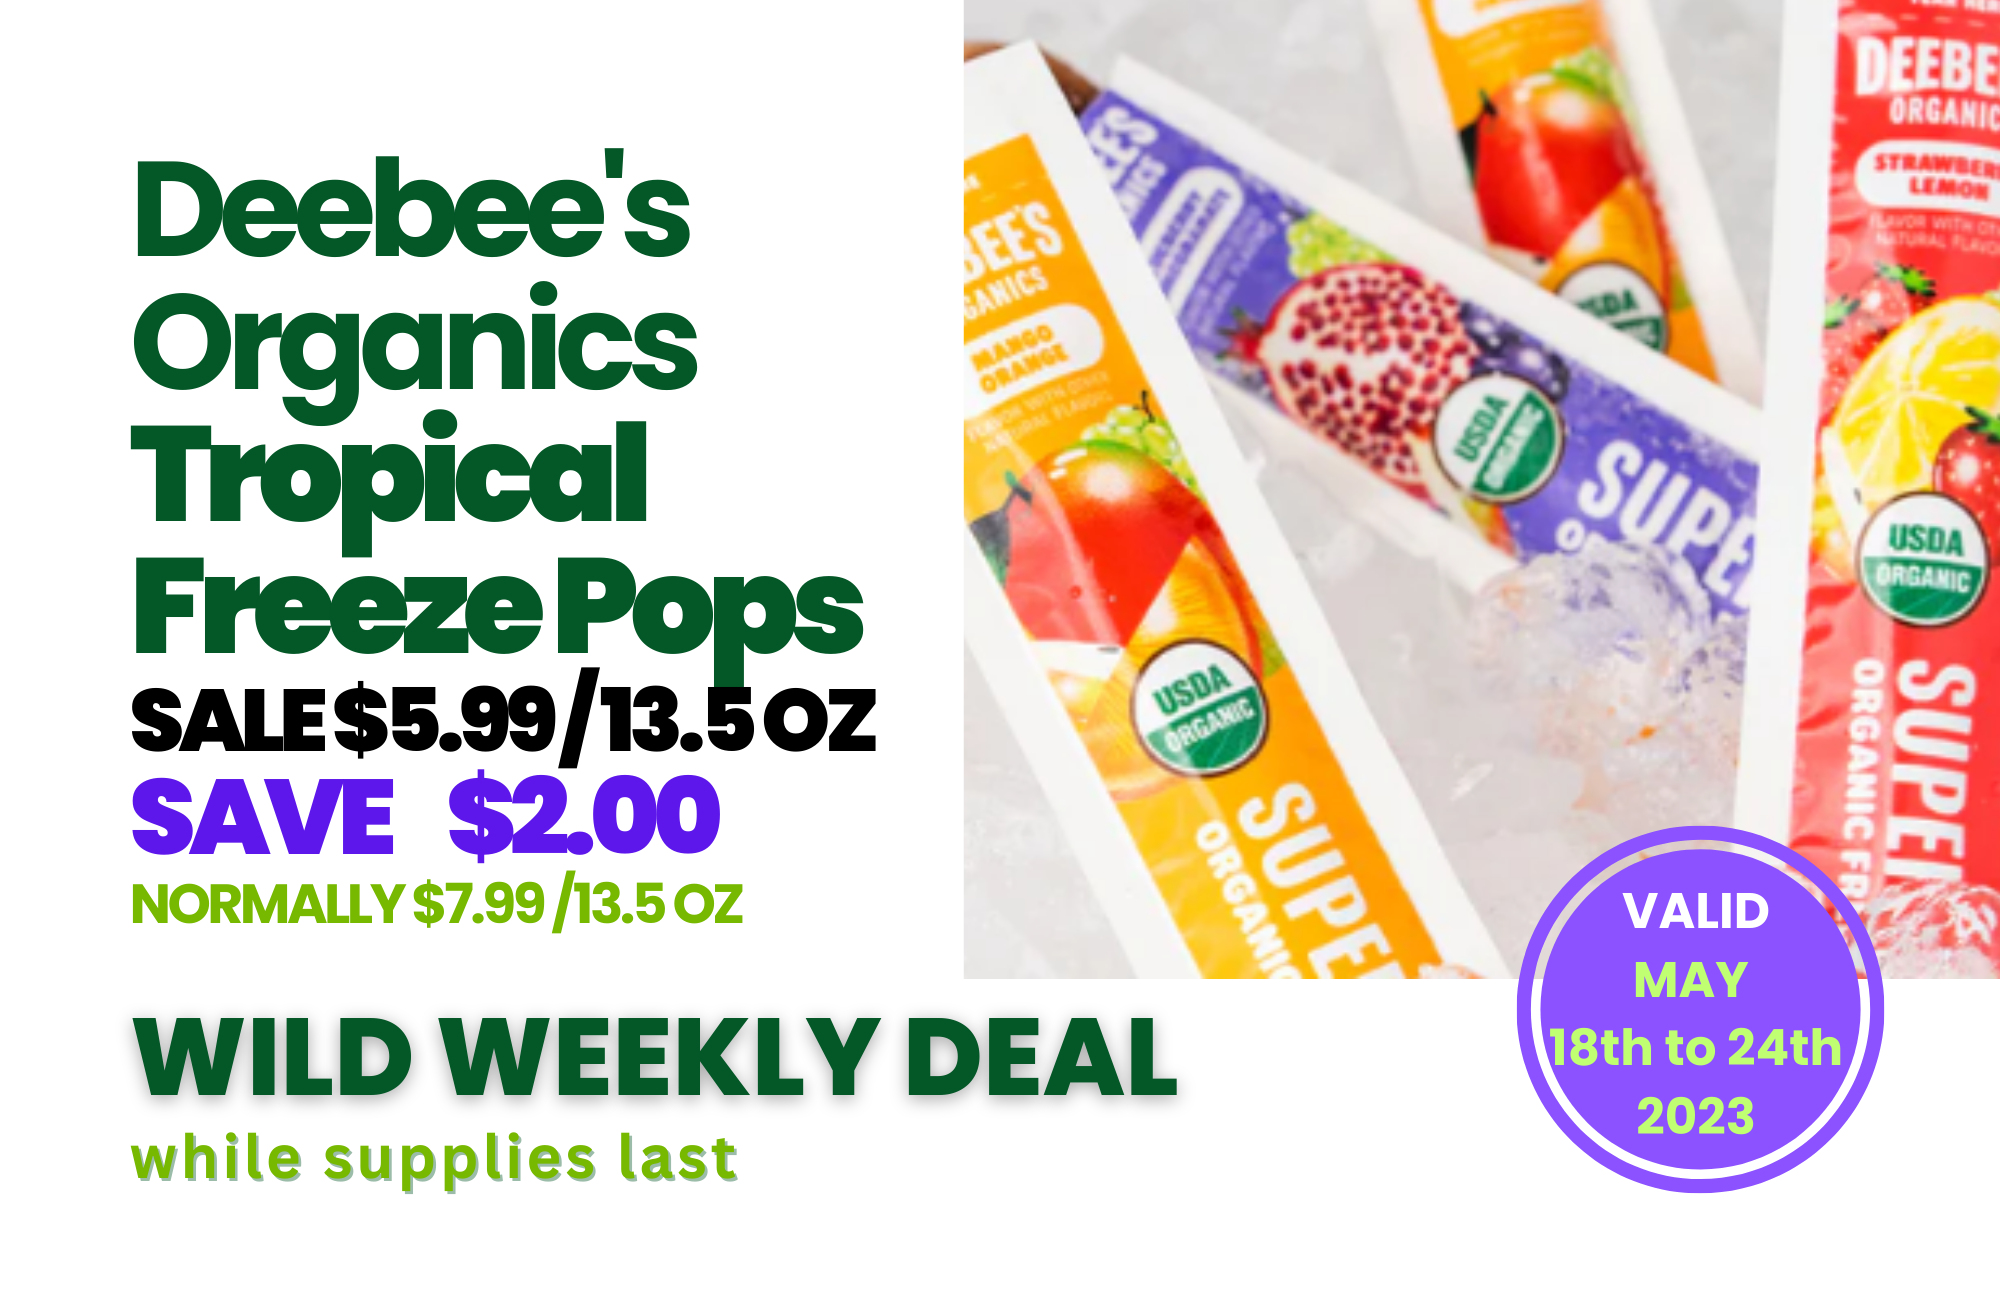 Wild Oats Market Williamstown MA Weekly Deals May 18-24 2023 Tropical Freeze Pops.png